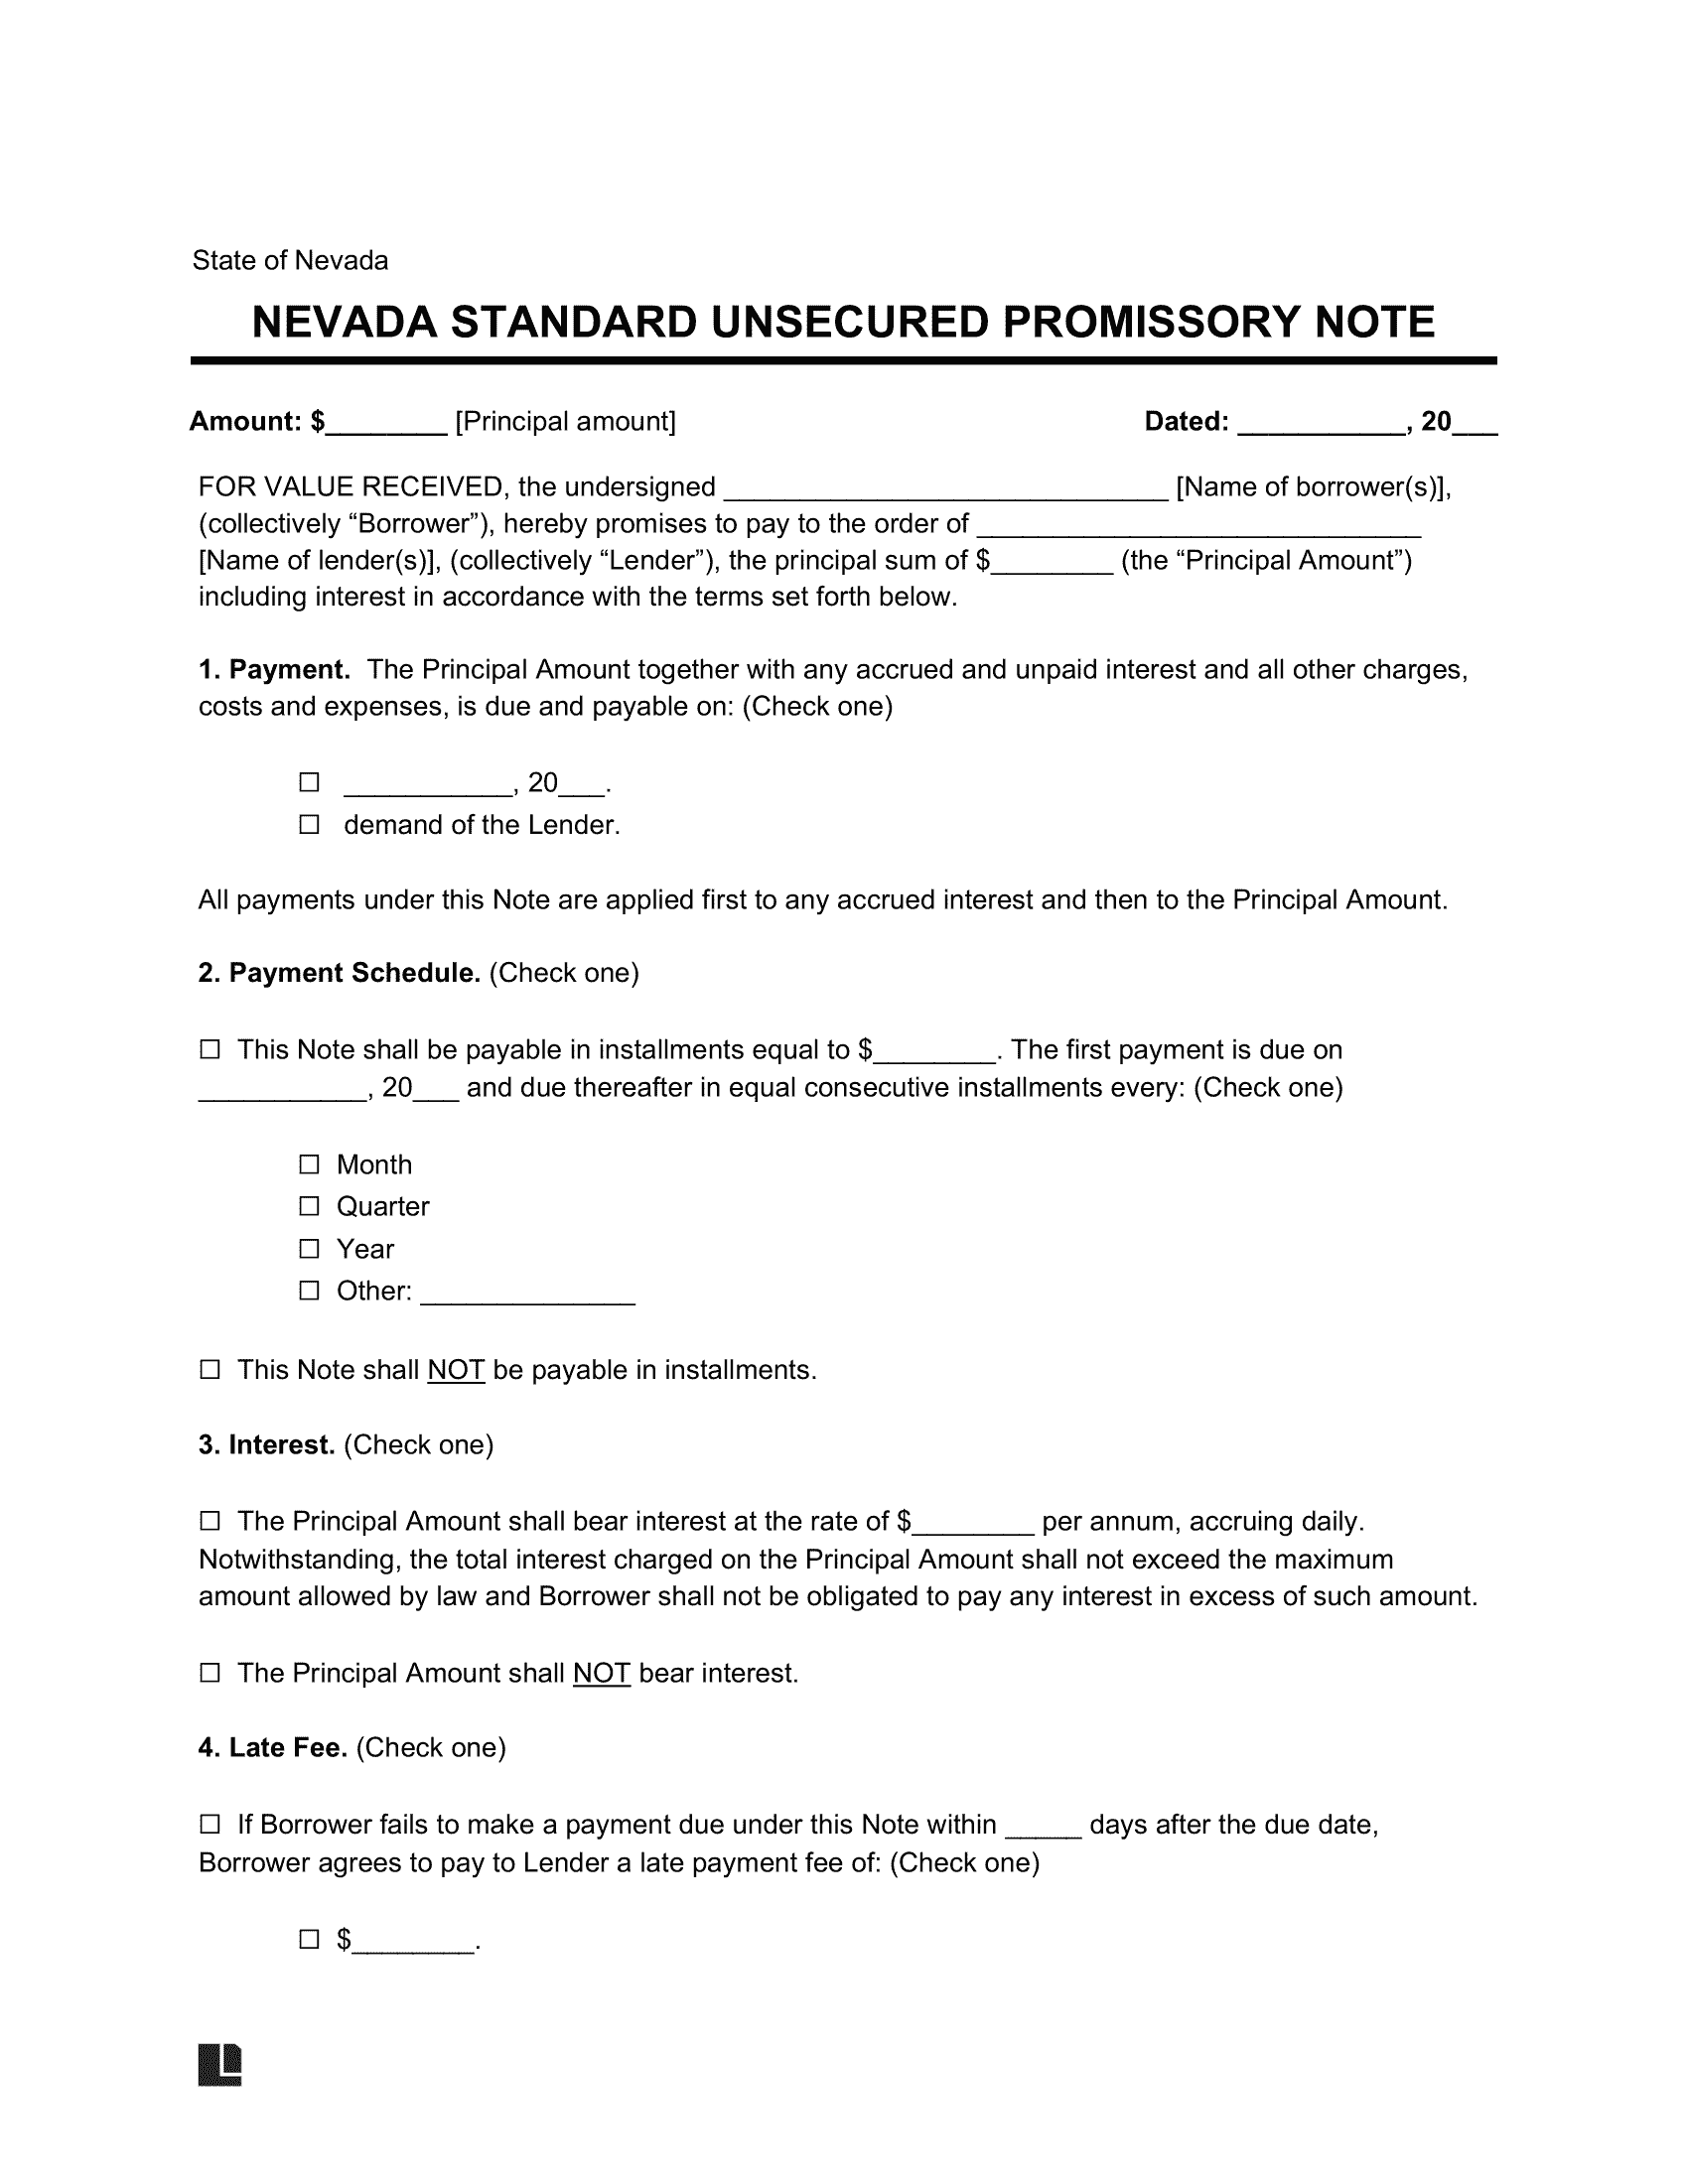 Nevada Standard Unsecured Promissory Note Template